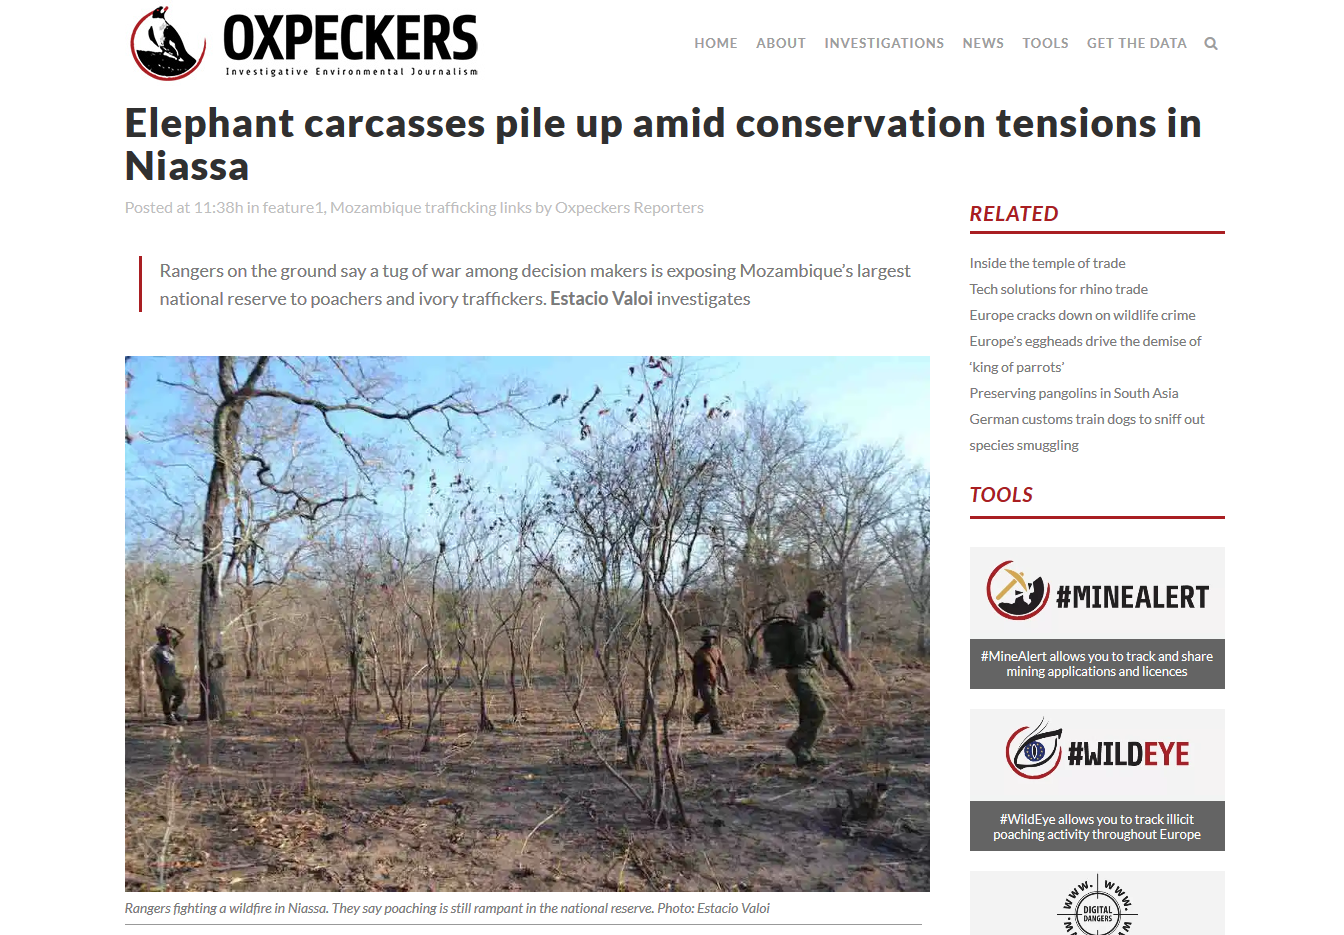 Screenshot_2019-09-12 Elephant carcasses pile up amid conservation tensions in Niassa.png